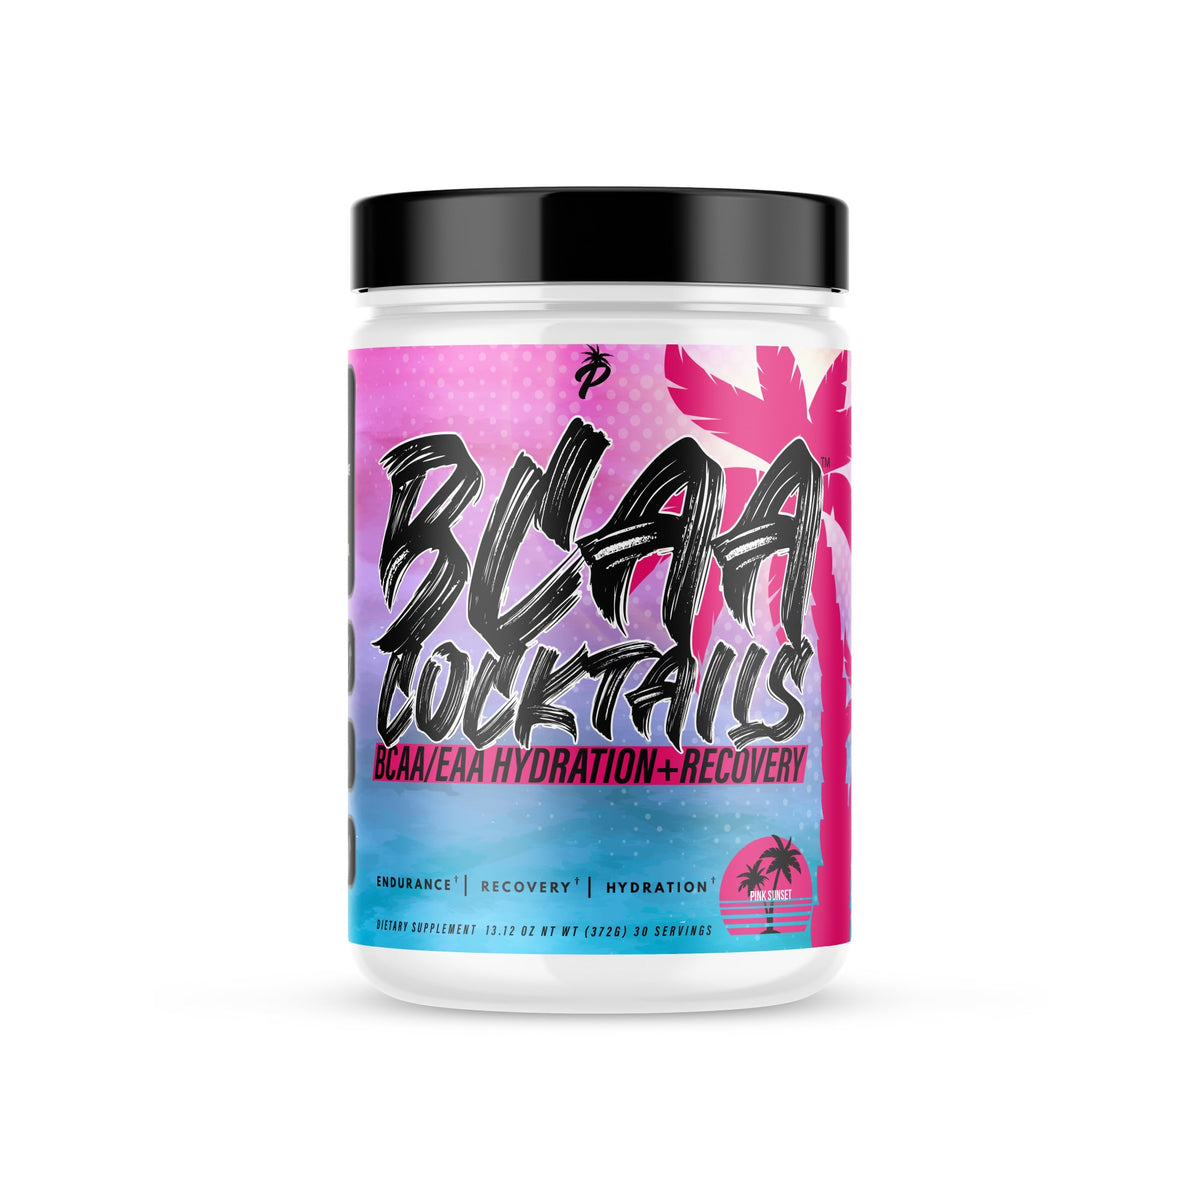 BCAA/EAA COCKTAILS | Superior Hydration + Recovery